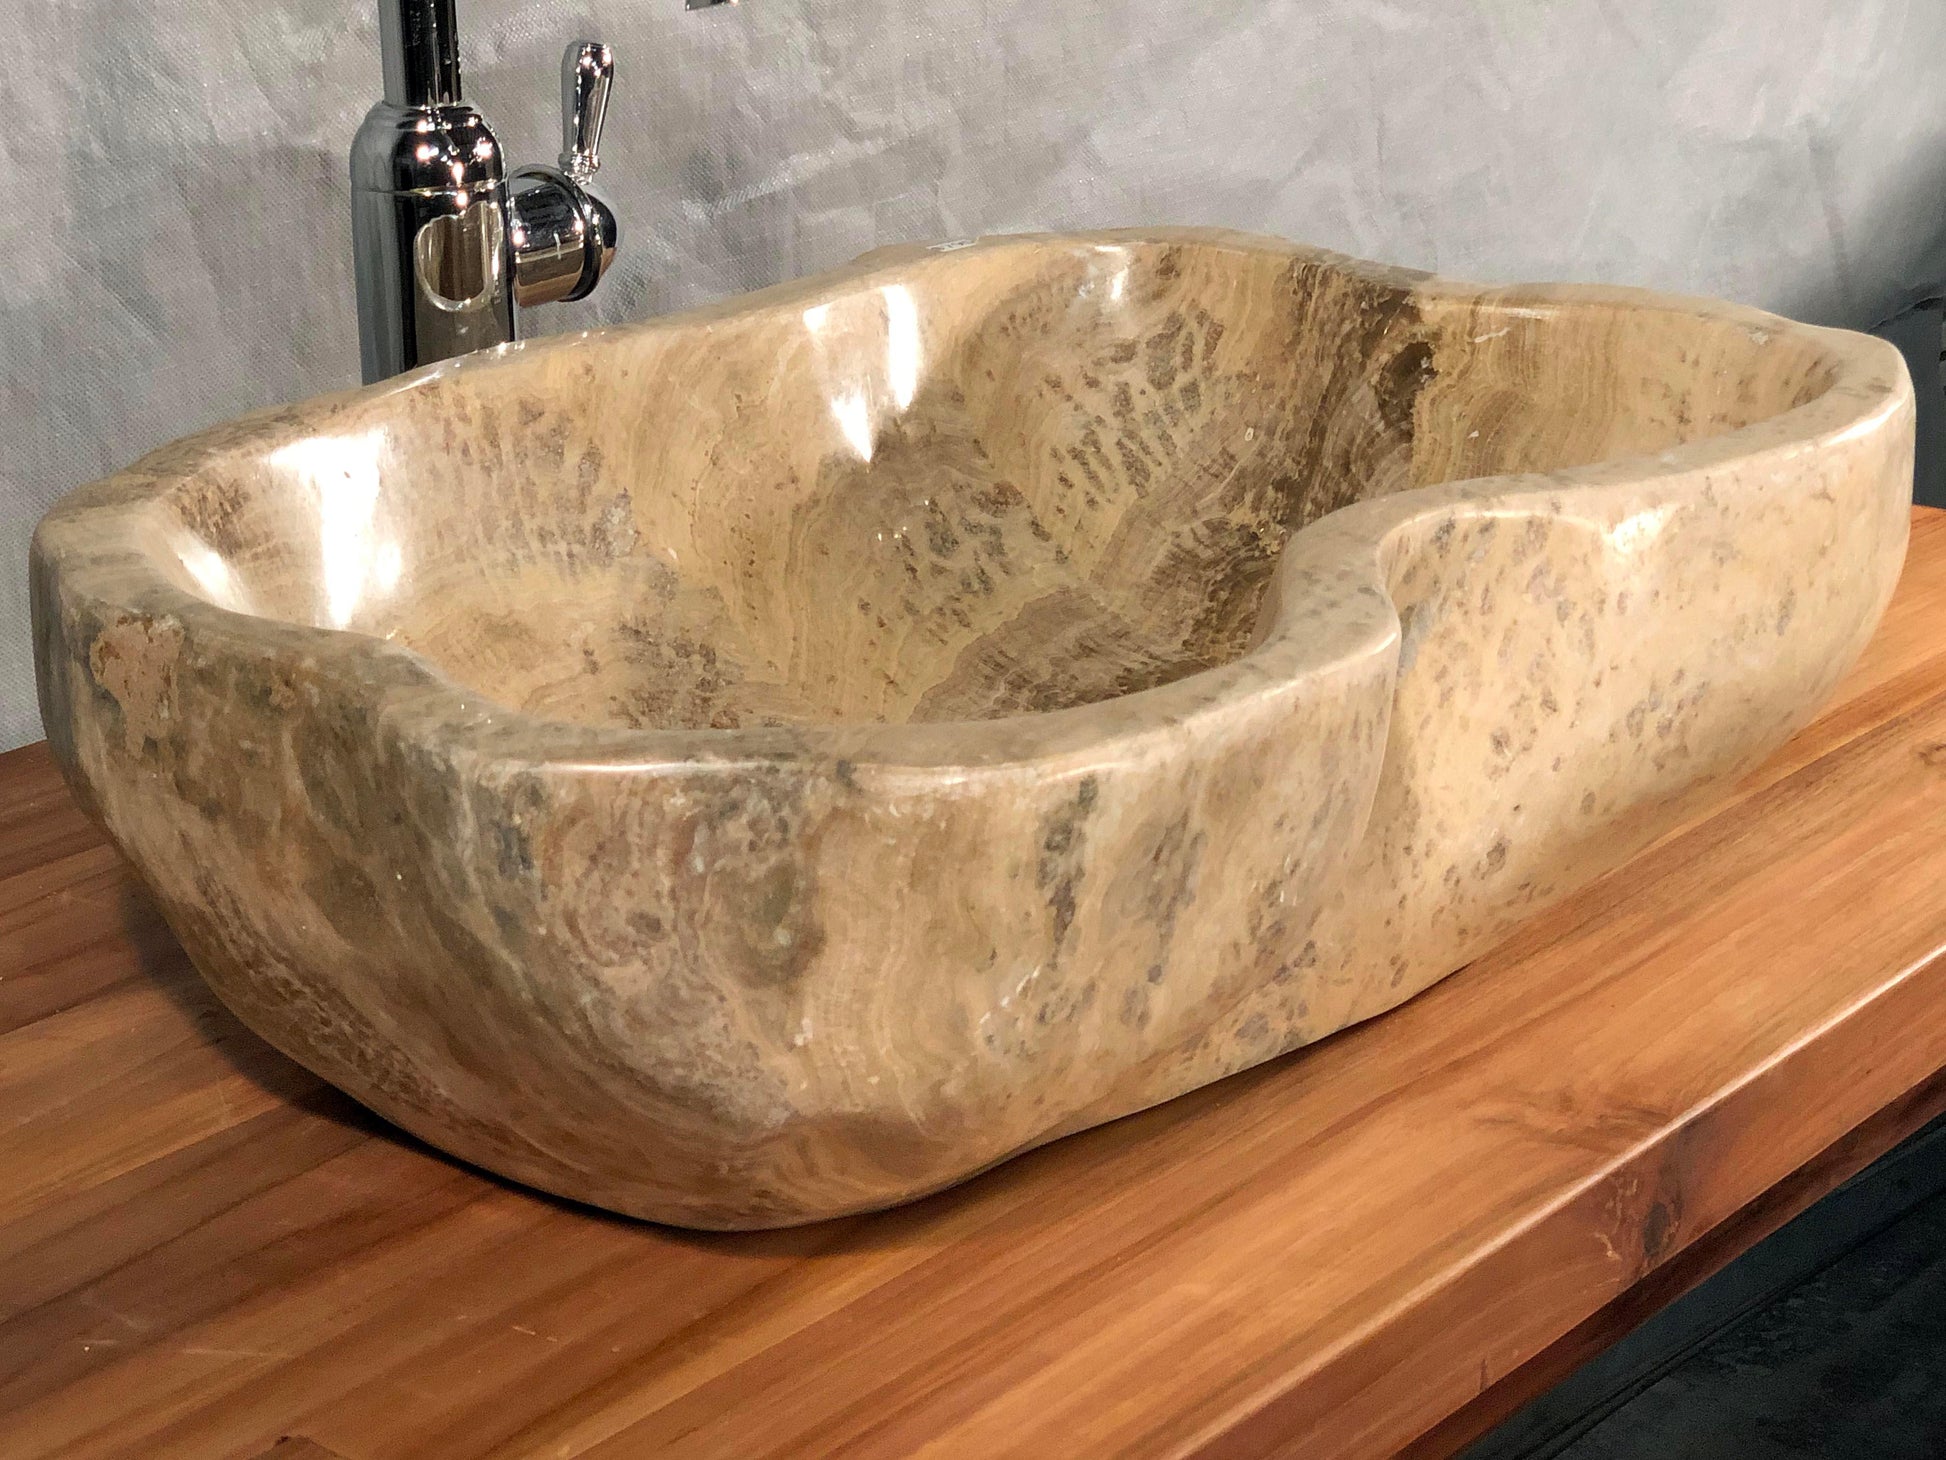 Mixed Marble & Onyx Brown Stone Vessel Sink, Organic Shape, MMO2 - Impact Imports